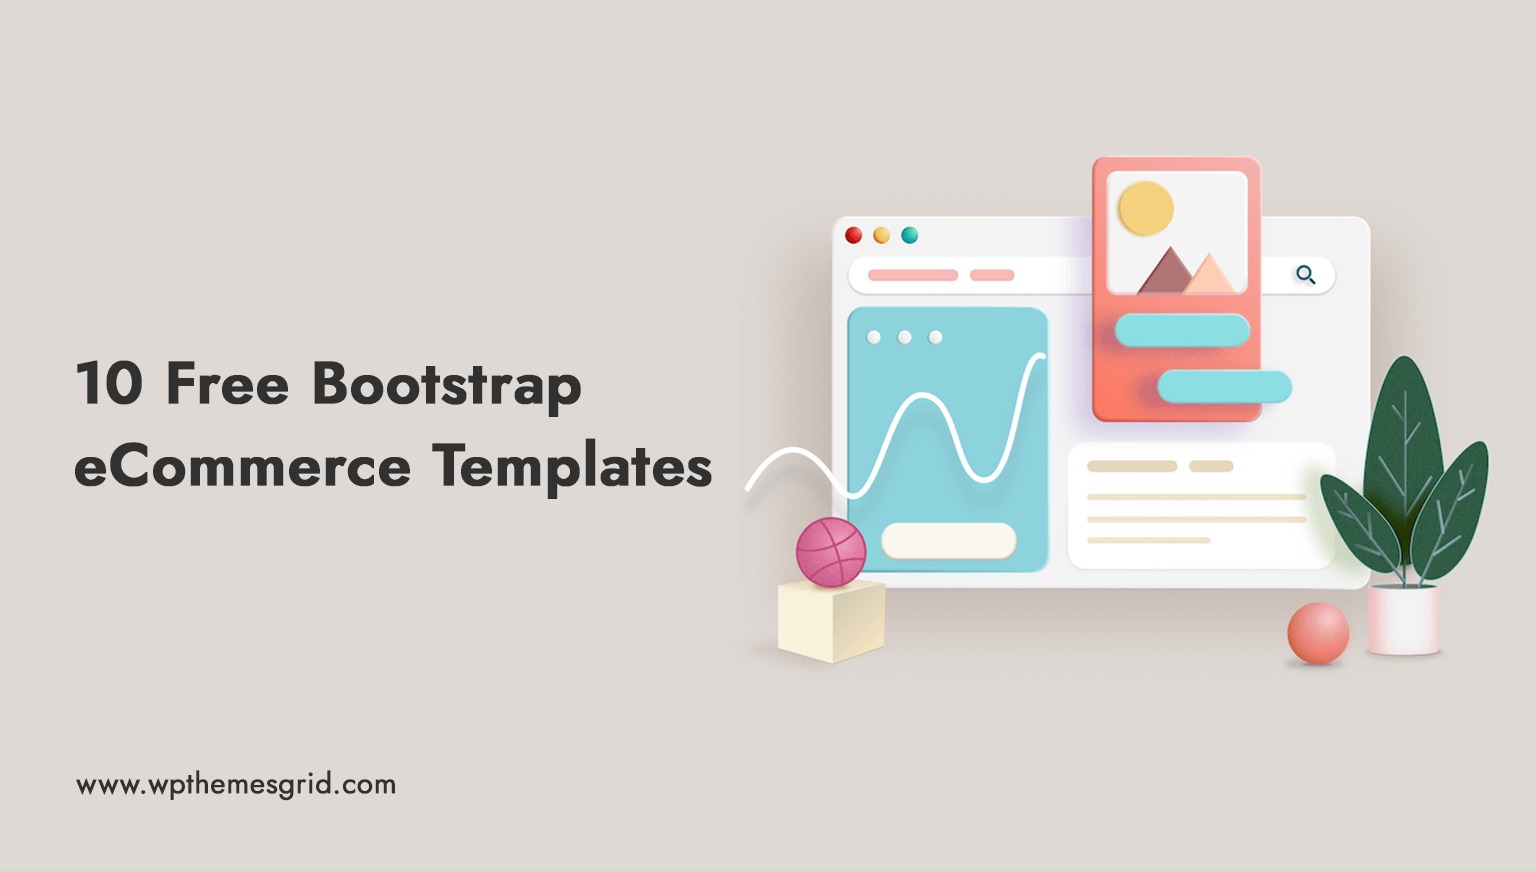 10 Free Bootstrap eCommerce Templates(Eye-Catching) - WpthemesGrid